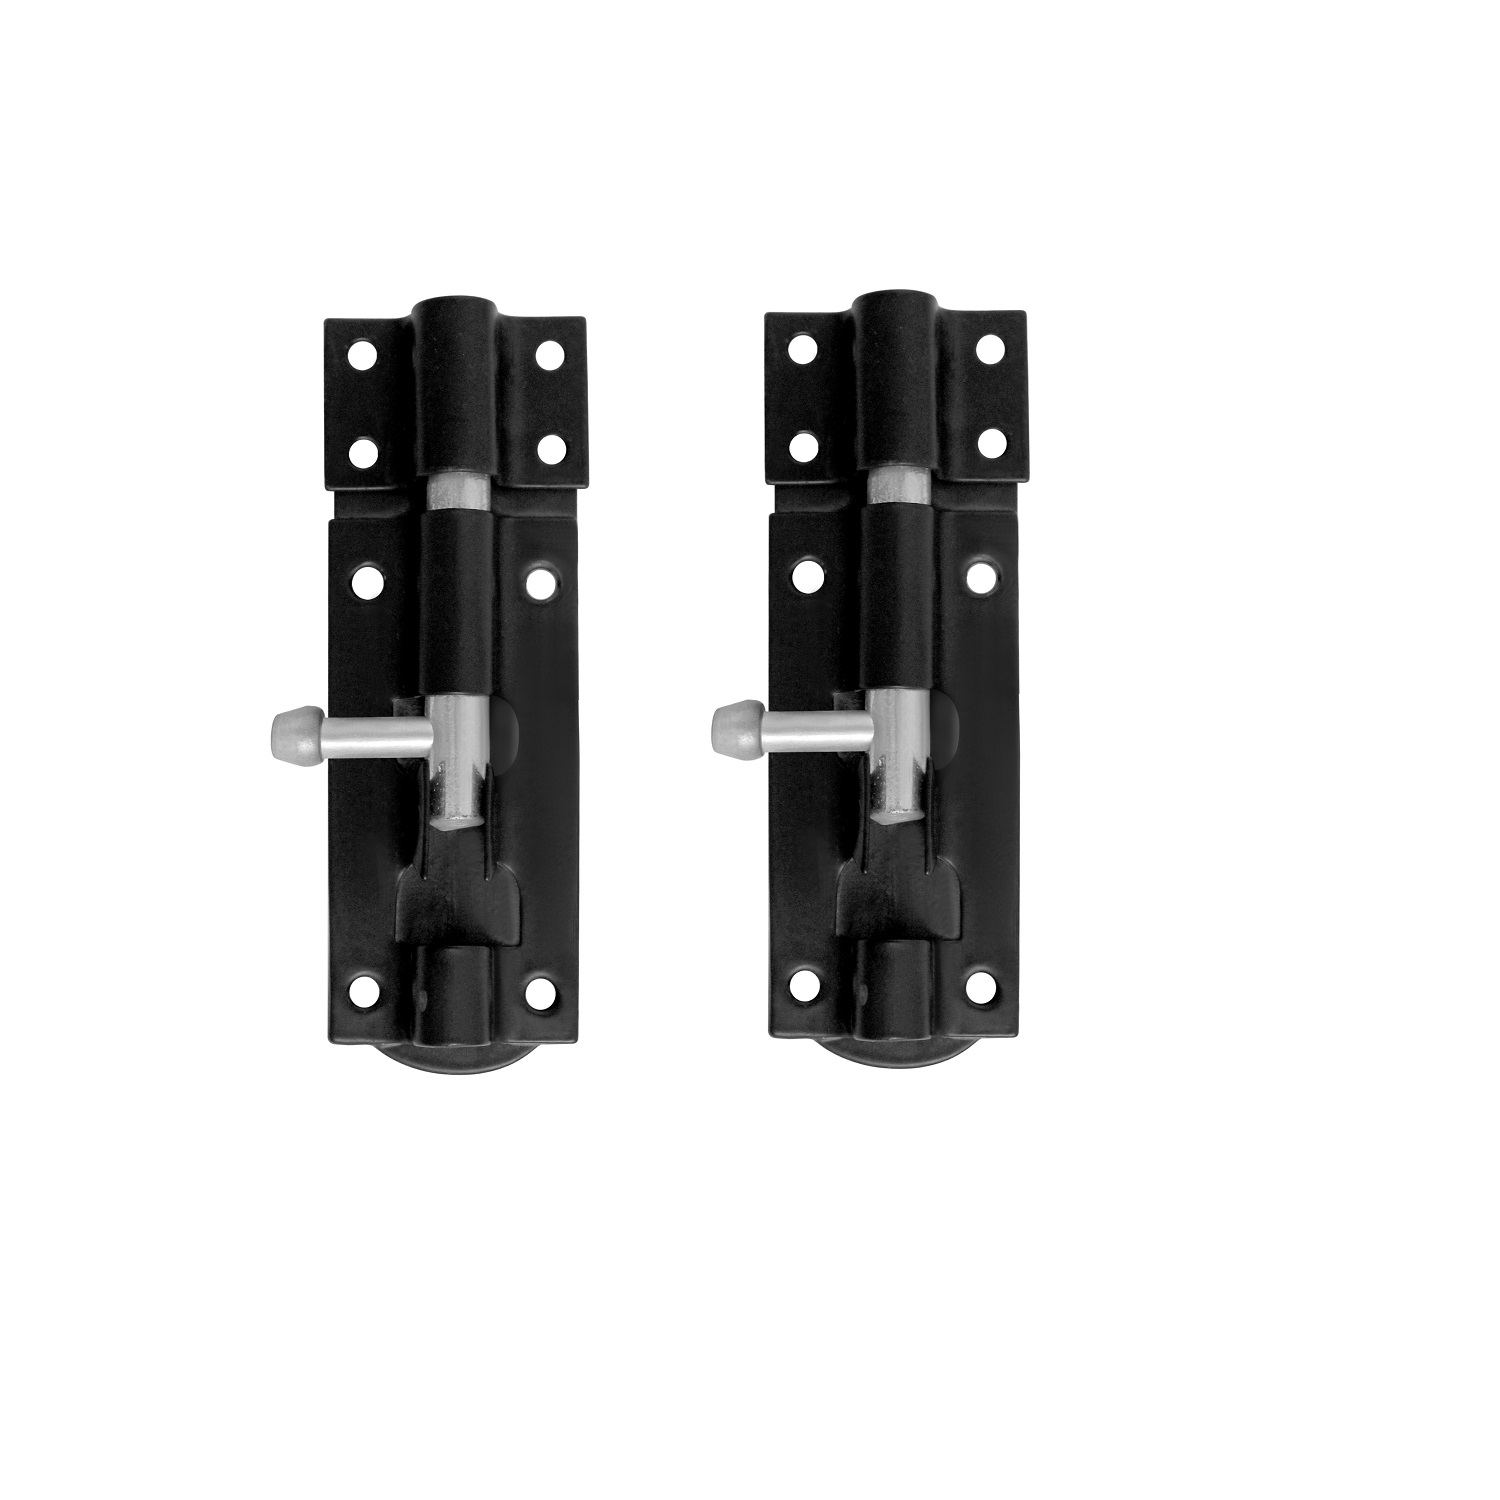 Tower Bolt 6 Inches – Black Powder Coated